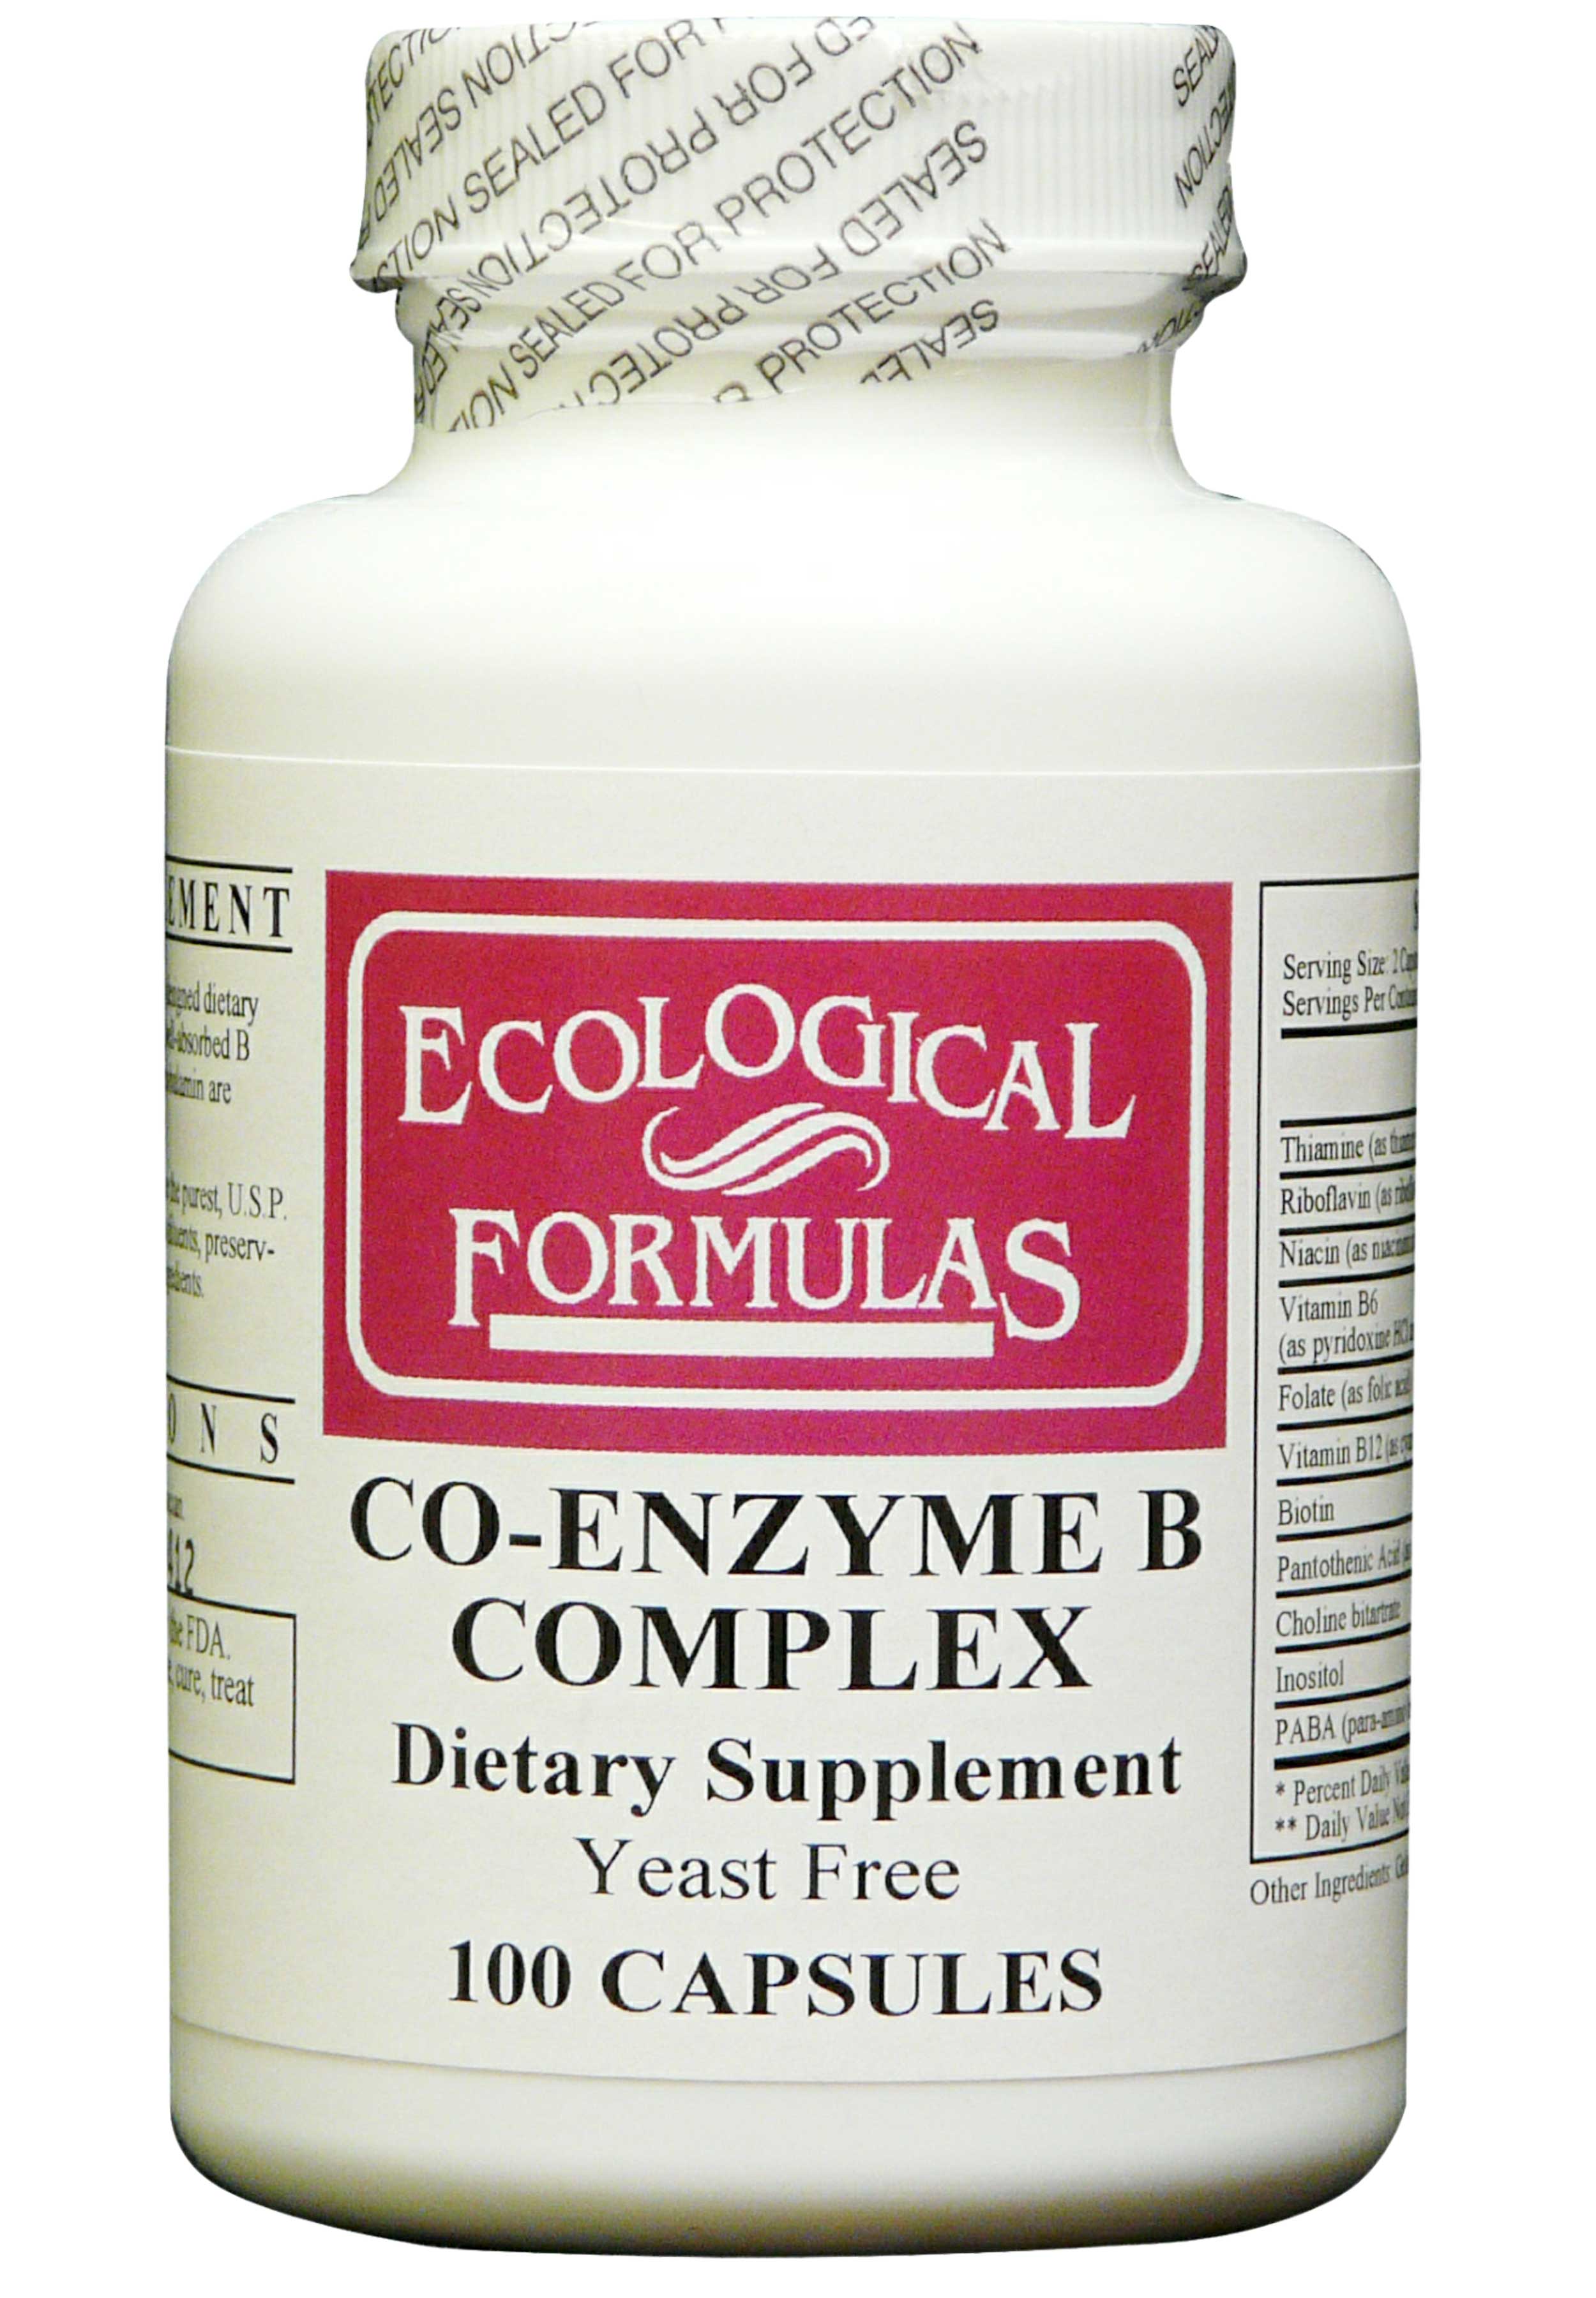 Ecological Formulas/Cardiovascular Research Co-Enzyme B Complex